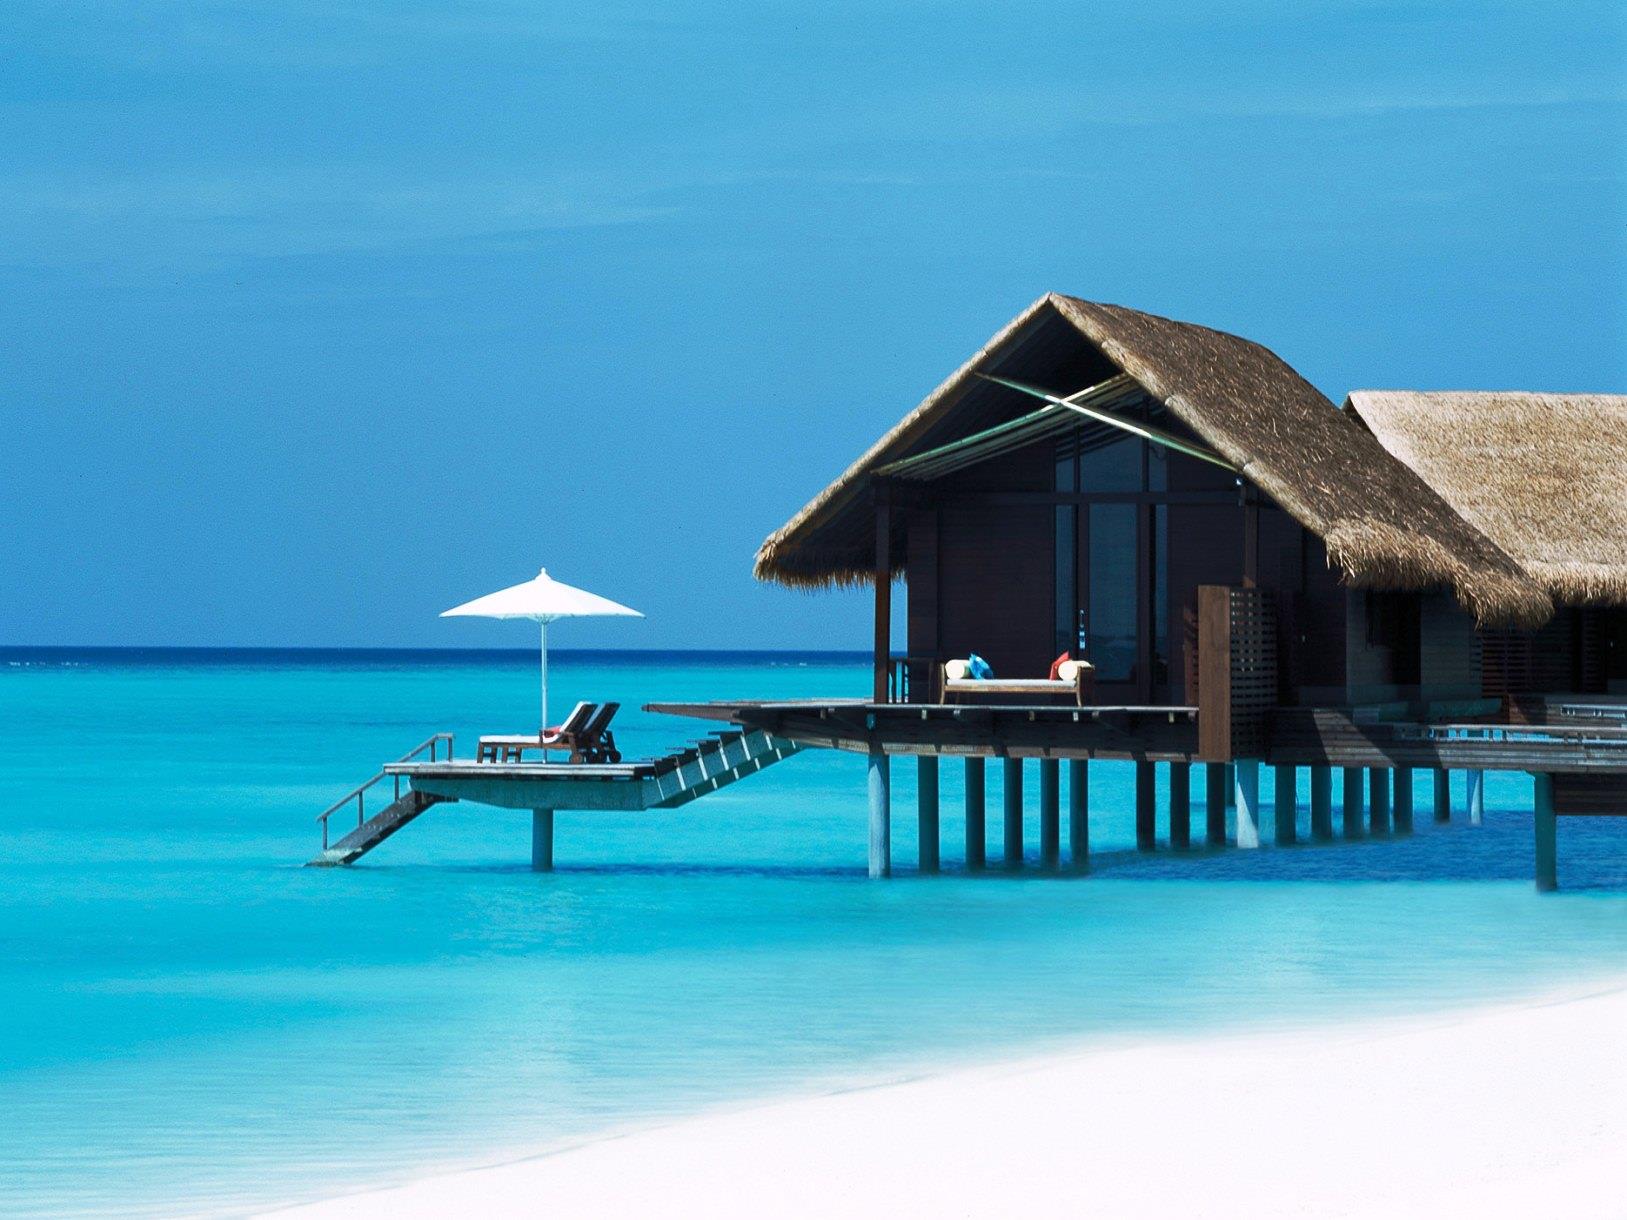 One&Only Reethi Rah Maldives FAQ 2017, What facilities are there in One&Only Reethi Rah Maldives 2017, What Languages Spoken are Supported in One&Only Reethi Rah Maldives 2017, Which payment cards are accepted in One&Only Reethi Rah Maldives , Maldives One&Only Reethi Rah room facilities and services Q&A 2017, Maldives One&Only Reethi Rah online booking services 2017, Maldives One&Only Reethi Rah address 2017, Maldives One&Only Reethi Rah telephone number 2017,Maldives One&Only Reethi Rah map 2017, Maldives One&Only Reethi Rah traffic guide 2017, how to go Maldives One&Only Reethi Rah, Maldives One&Only Reethi Rah booking online 2017, Maldives One&Only Reethi Rah room types 2017.